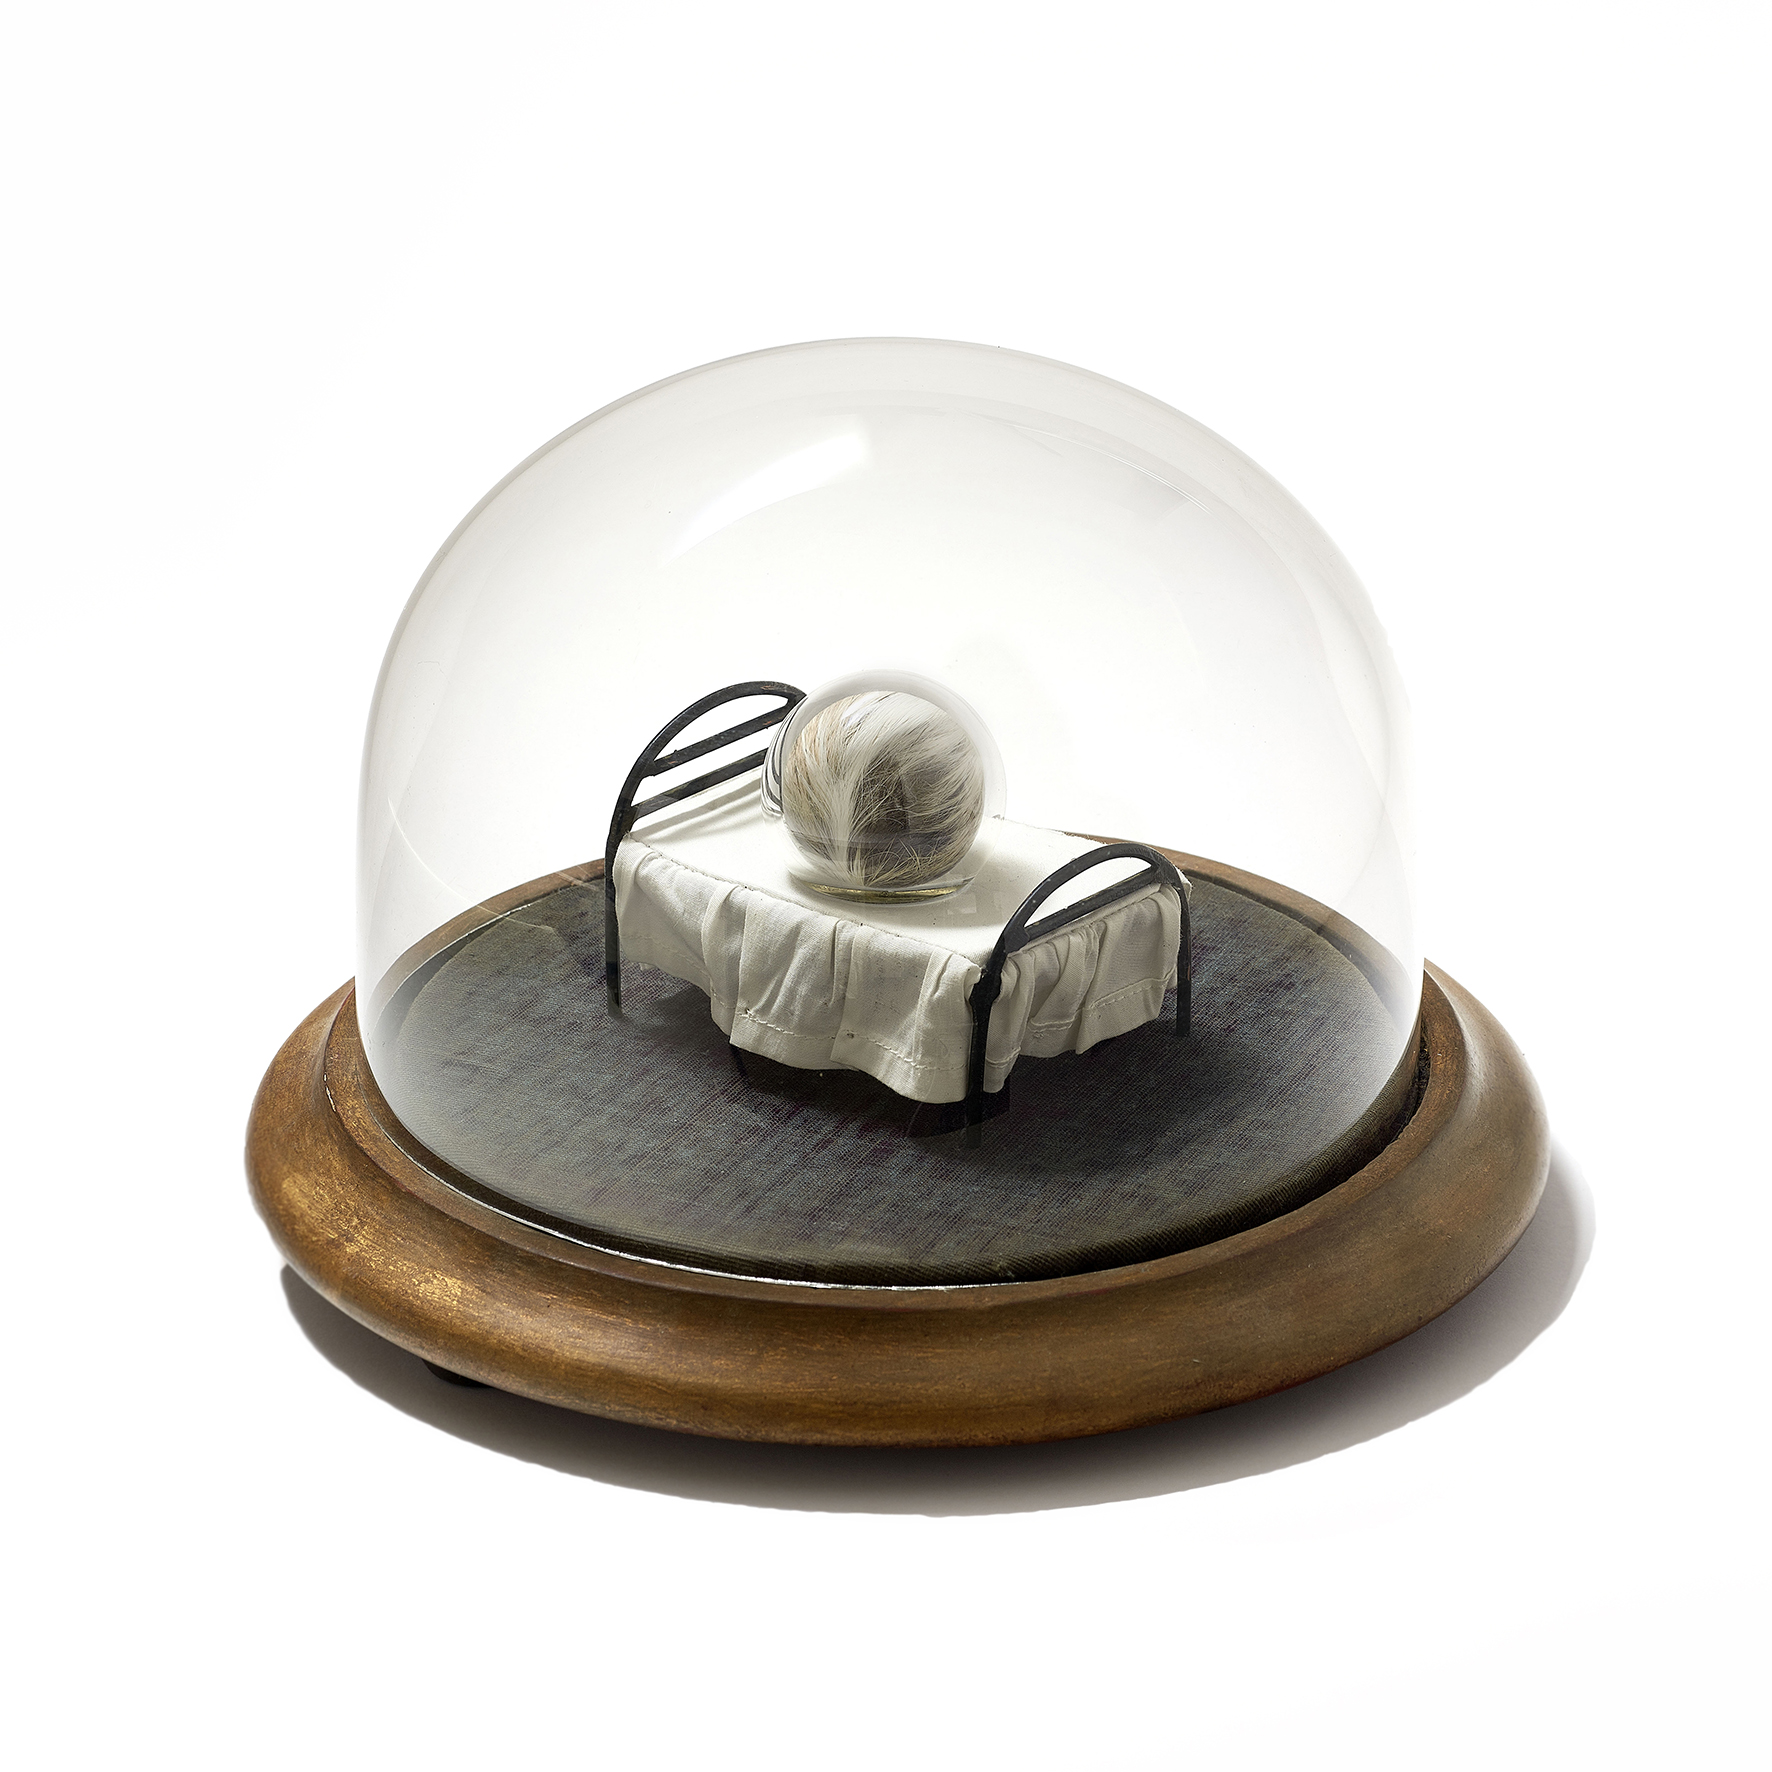 Seed on Bed, 2017, vintage fur, handblown glass, cotton, steel inside antique glass dome, 8x6x5.5cm (without dome), 11.5x17.17cm (with dome) rel=